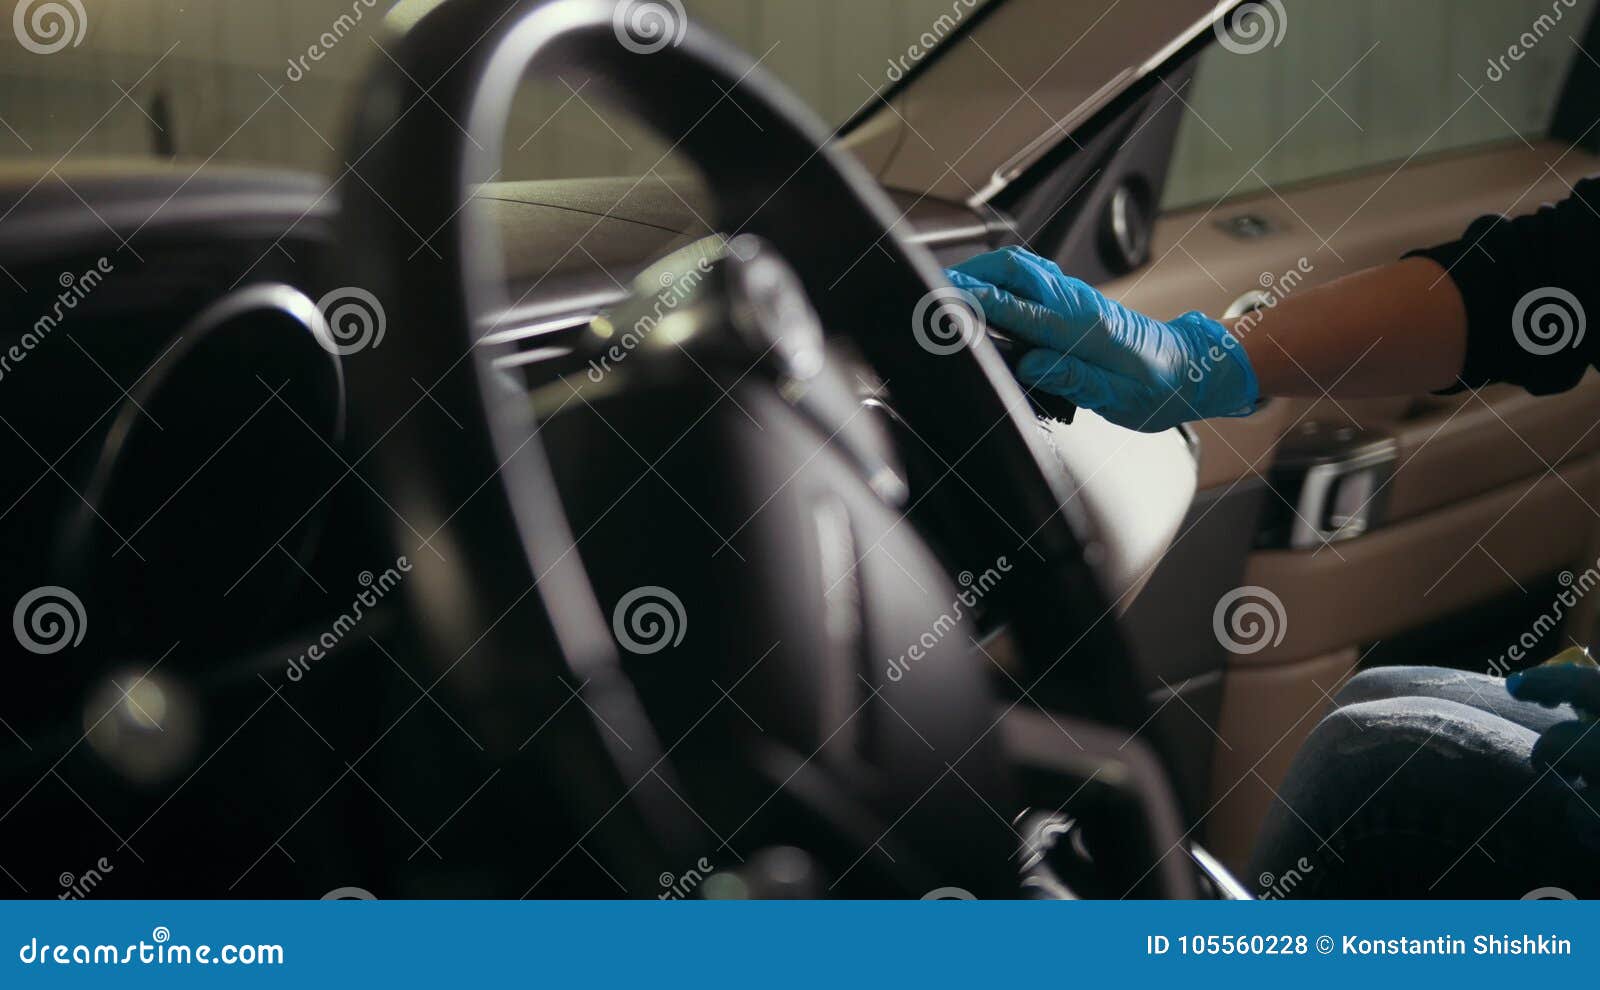 Worker In Gloves Is Puting Cream On The Brush And Washing A Car Interior